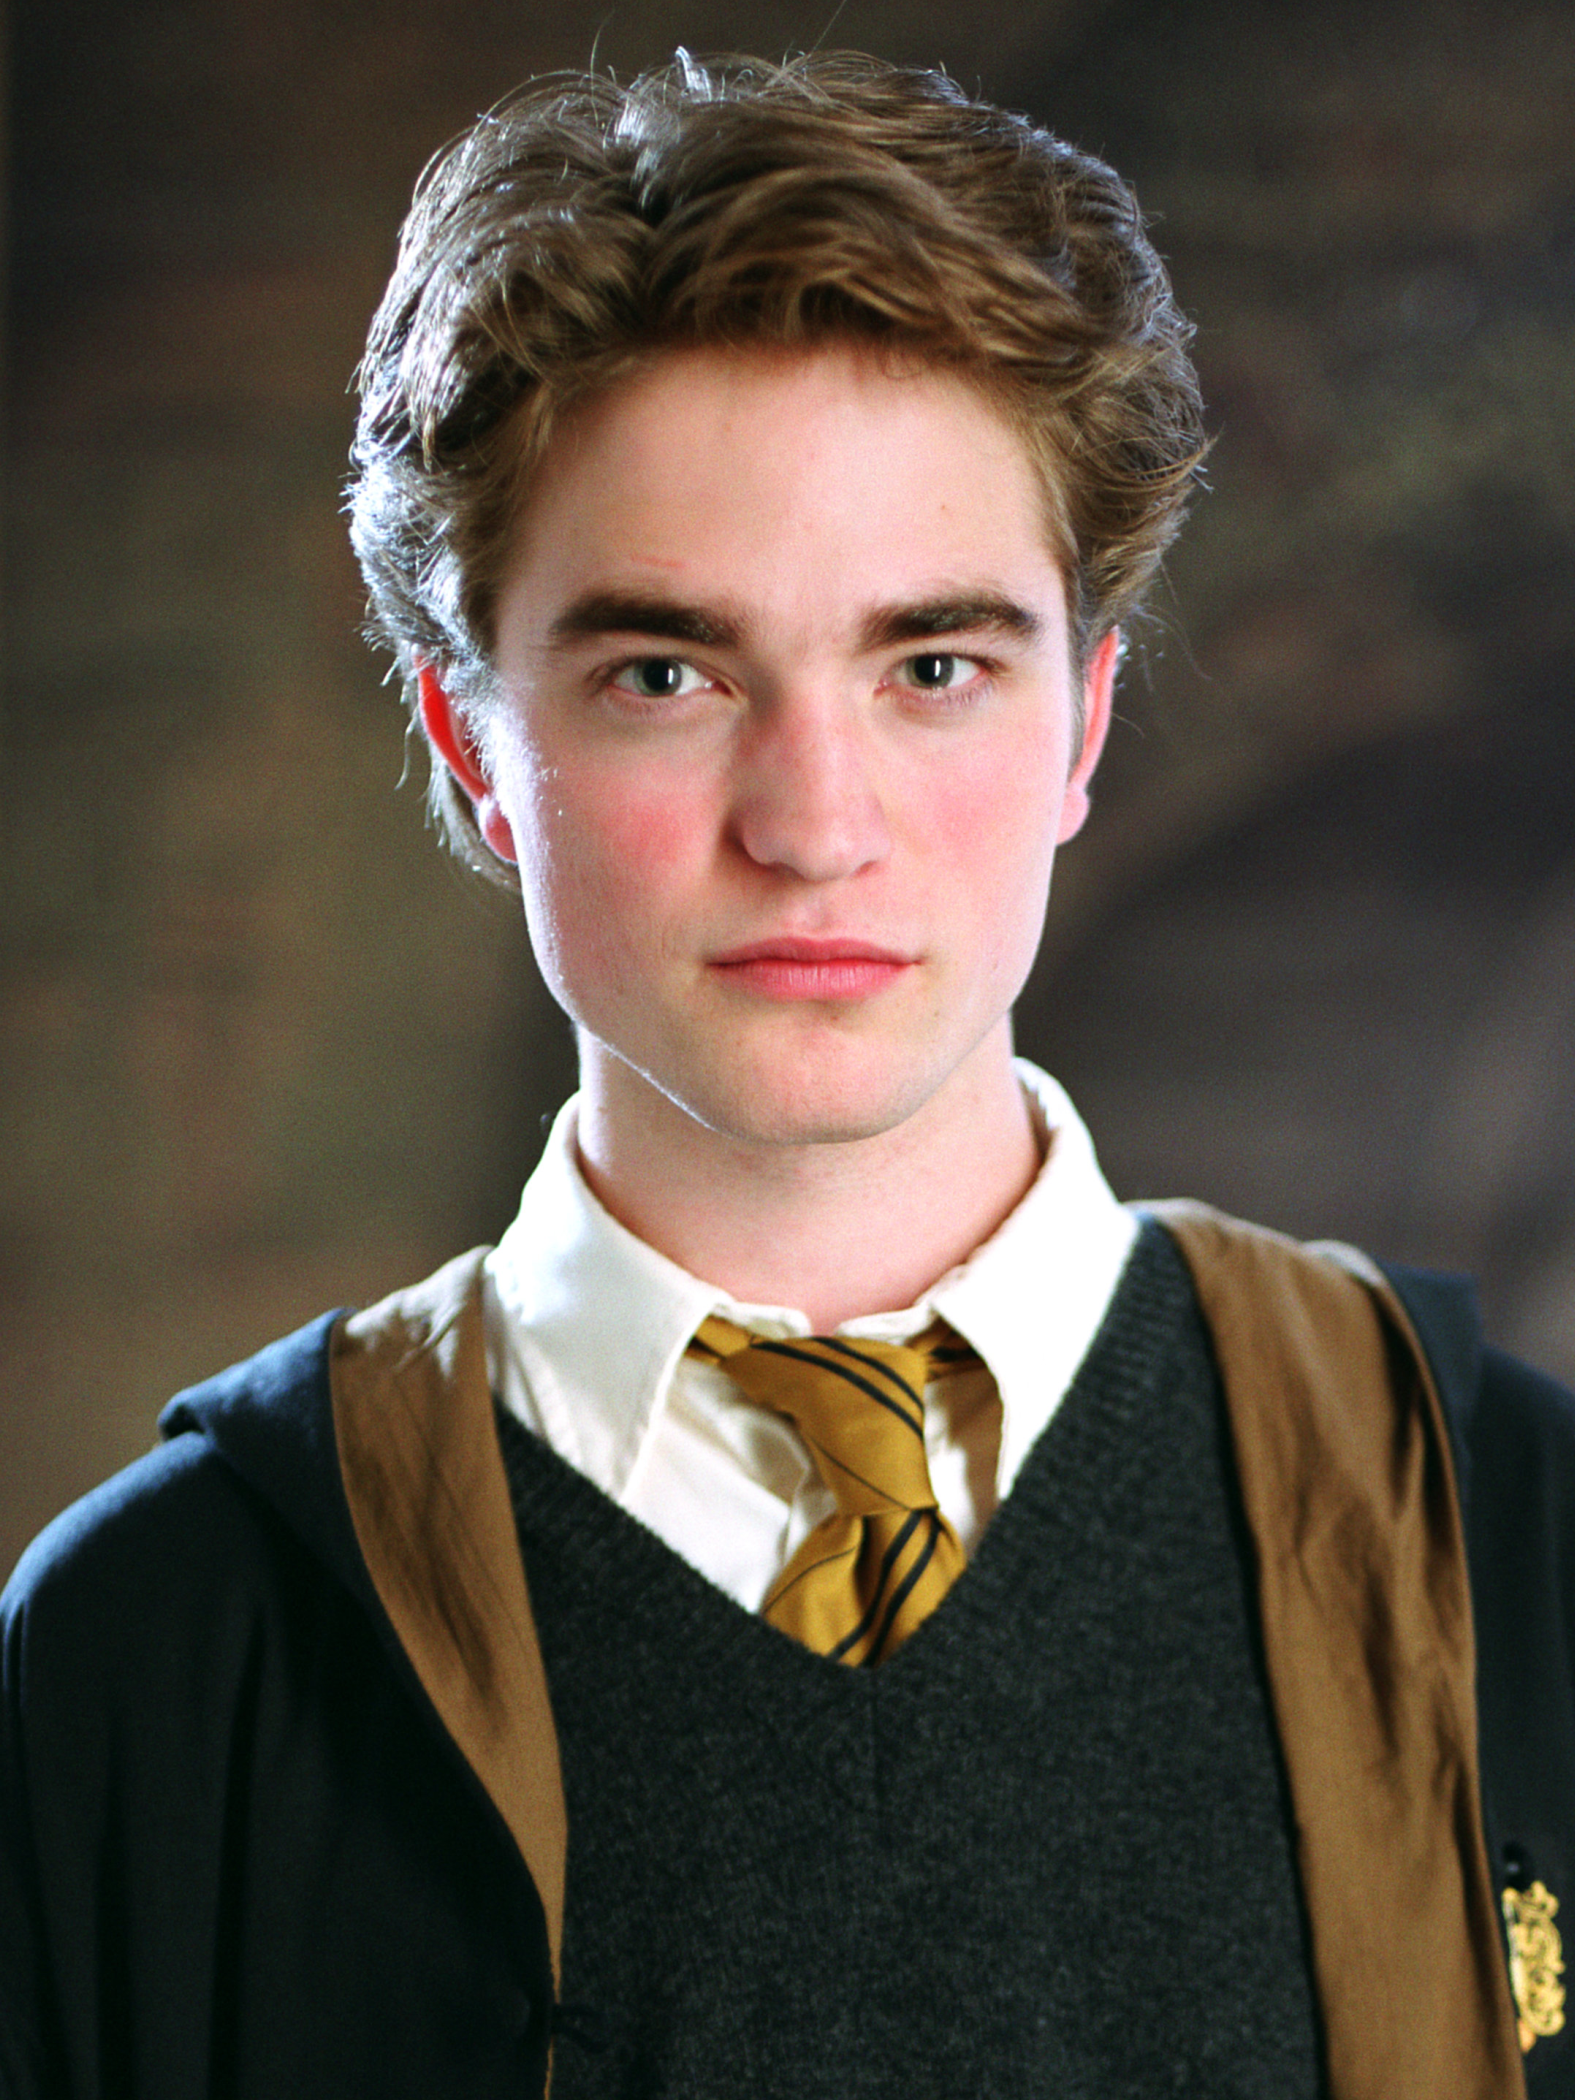 What actor played Cedric Diggory in the Harry Potter series? 2